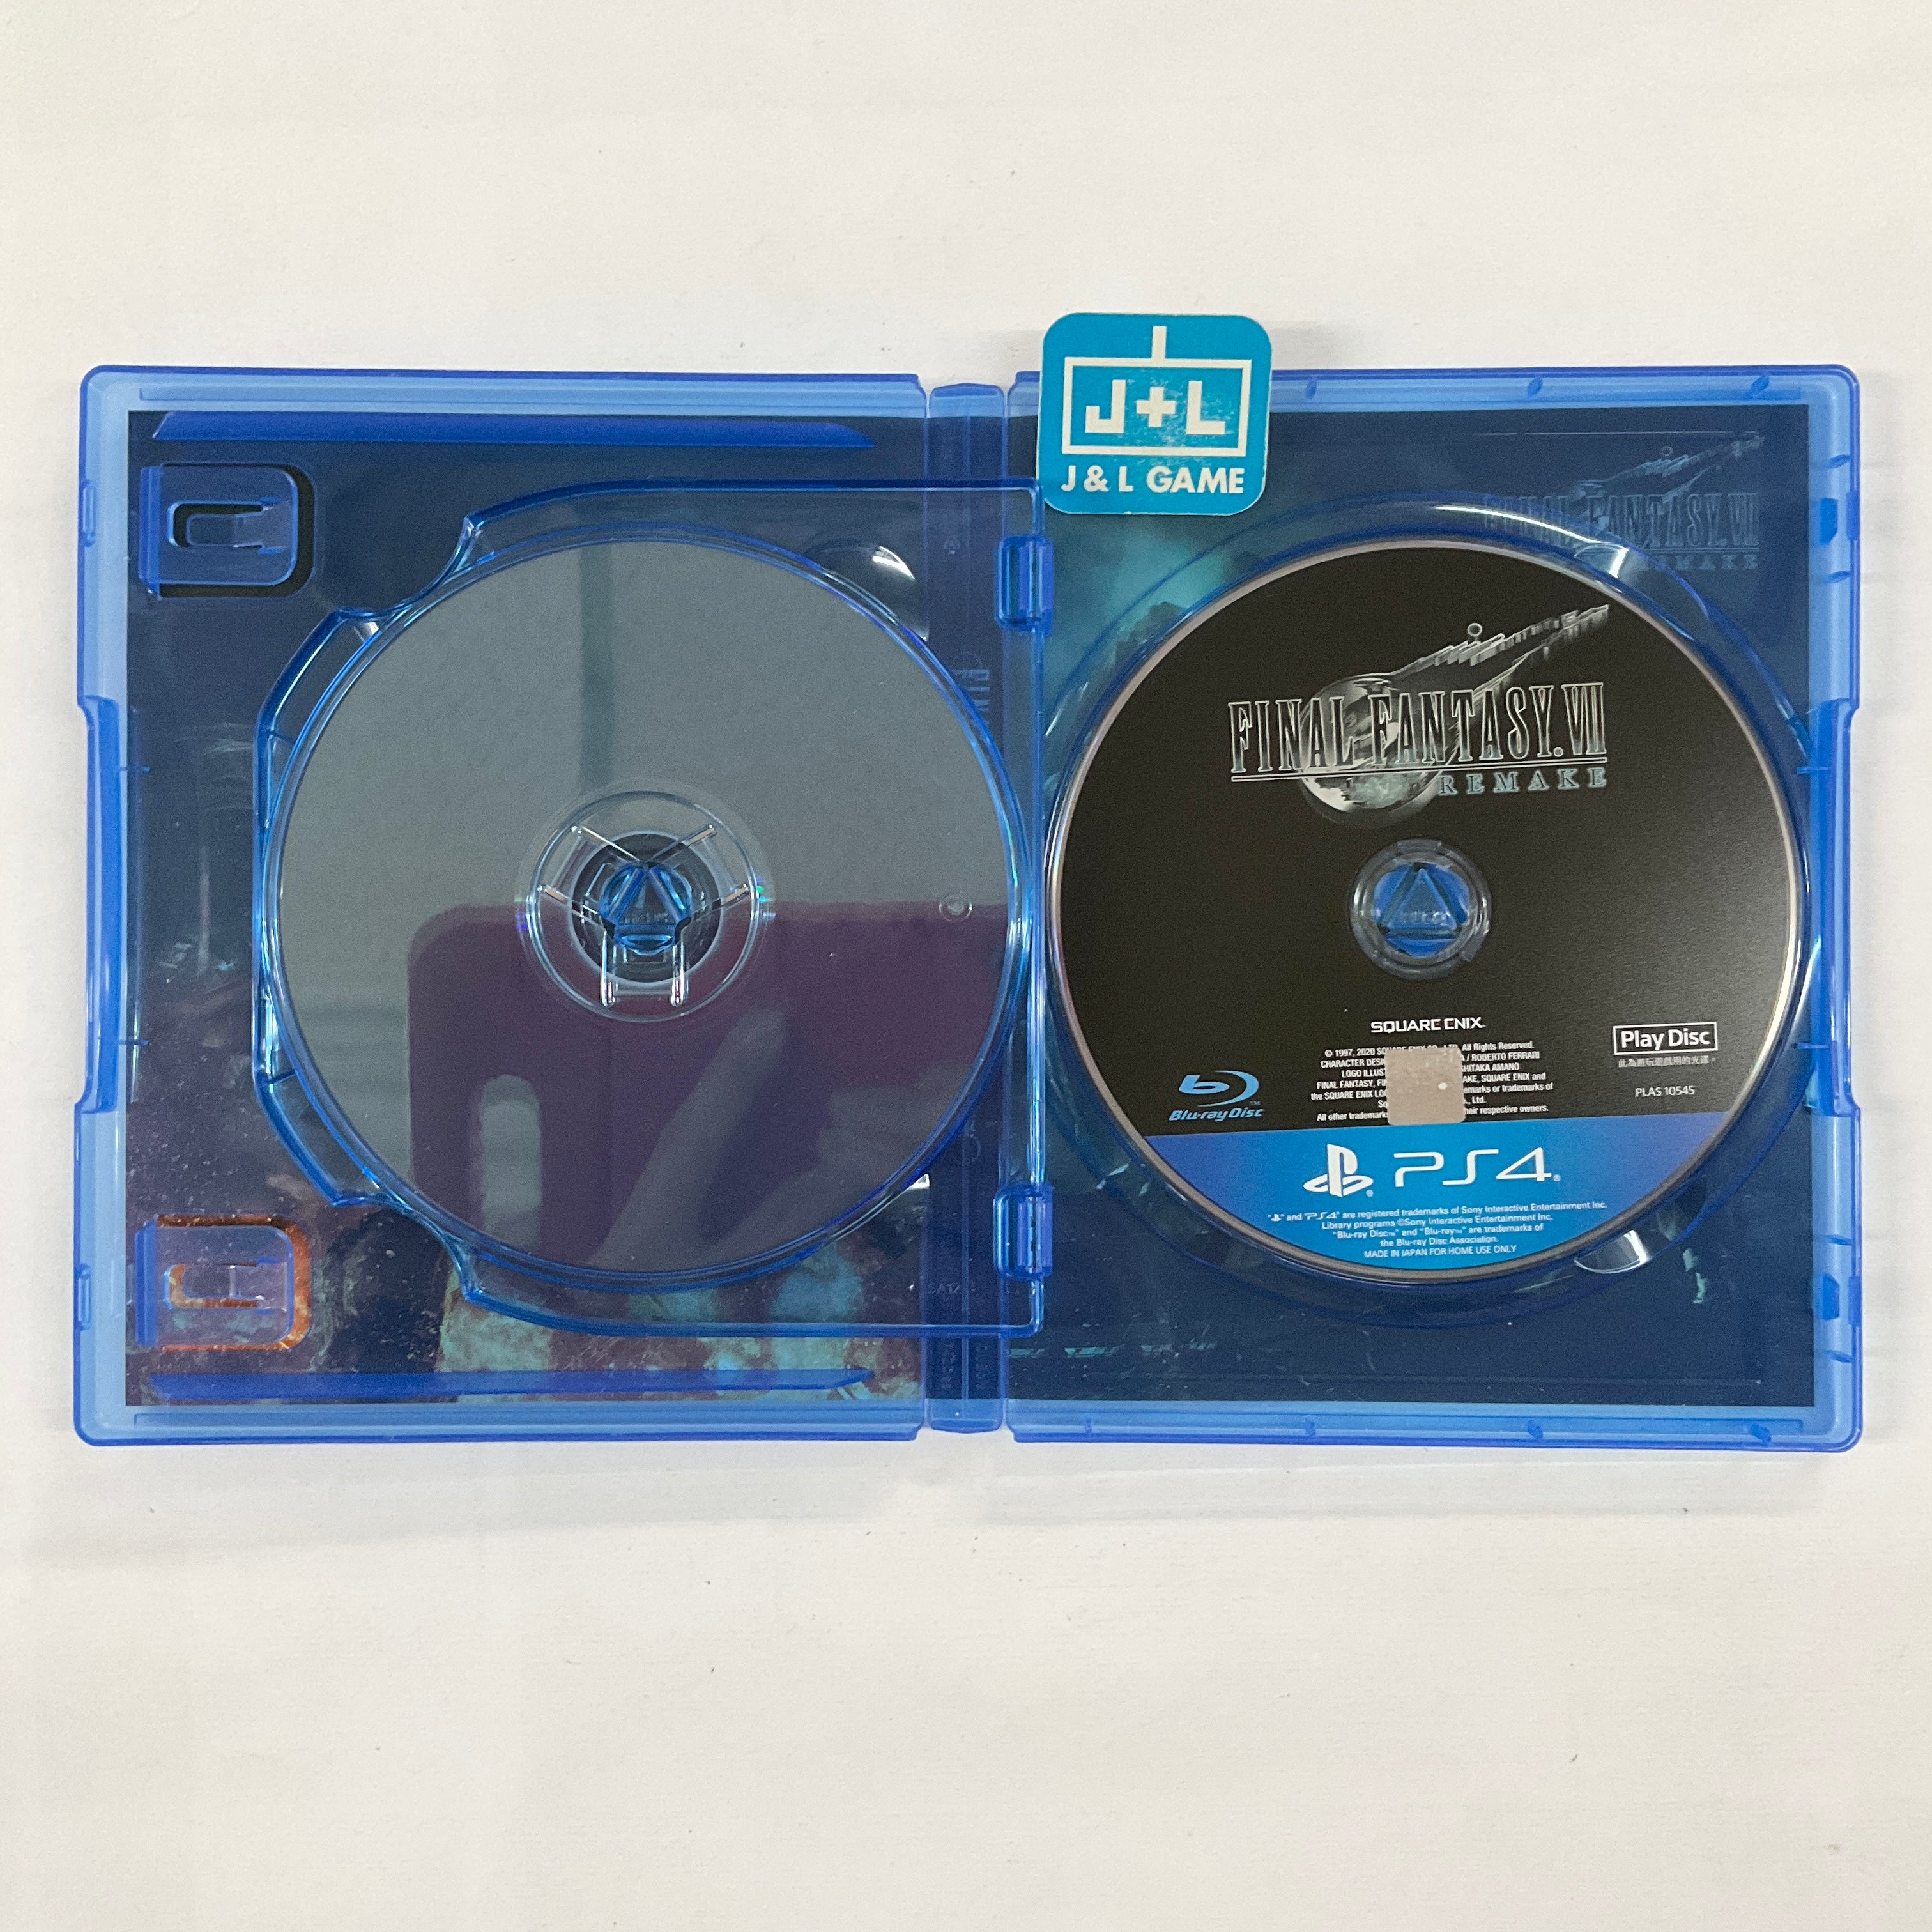 Final Fantasy VII: Remake (Chinese Sub) - (PS4) PlayStation 4 [Pre-Owned] (Asia Import) Video Games Square Enix   